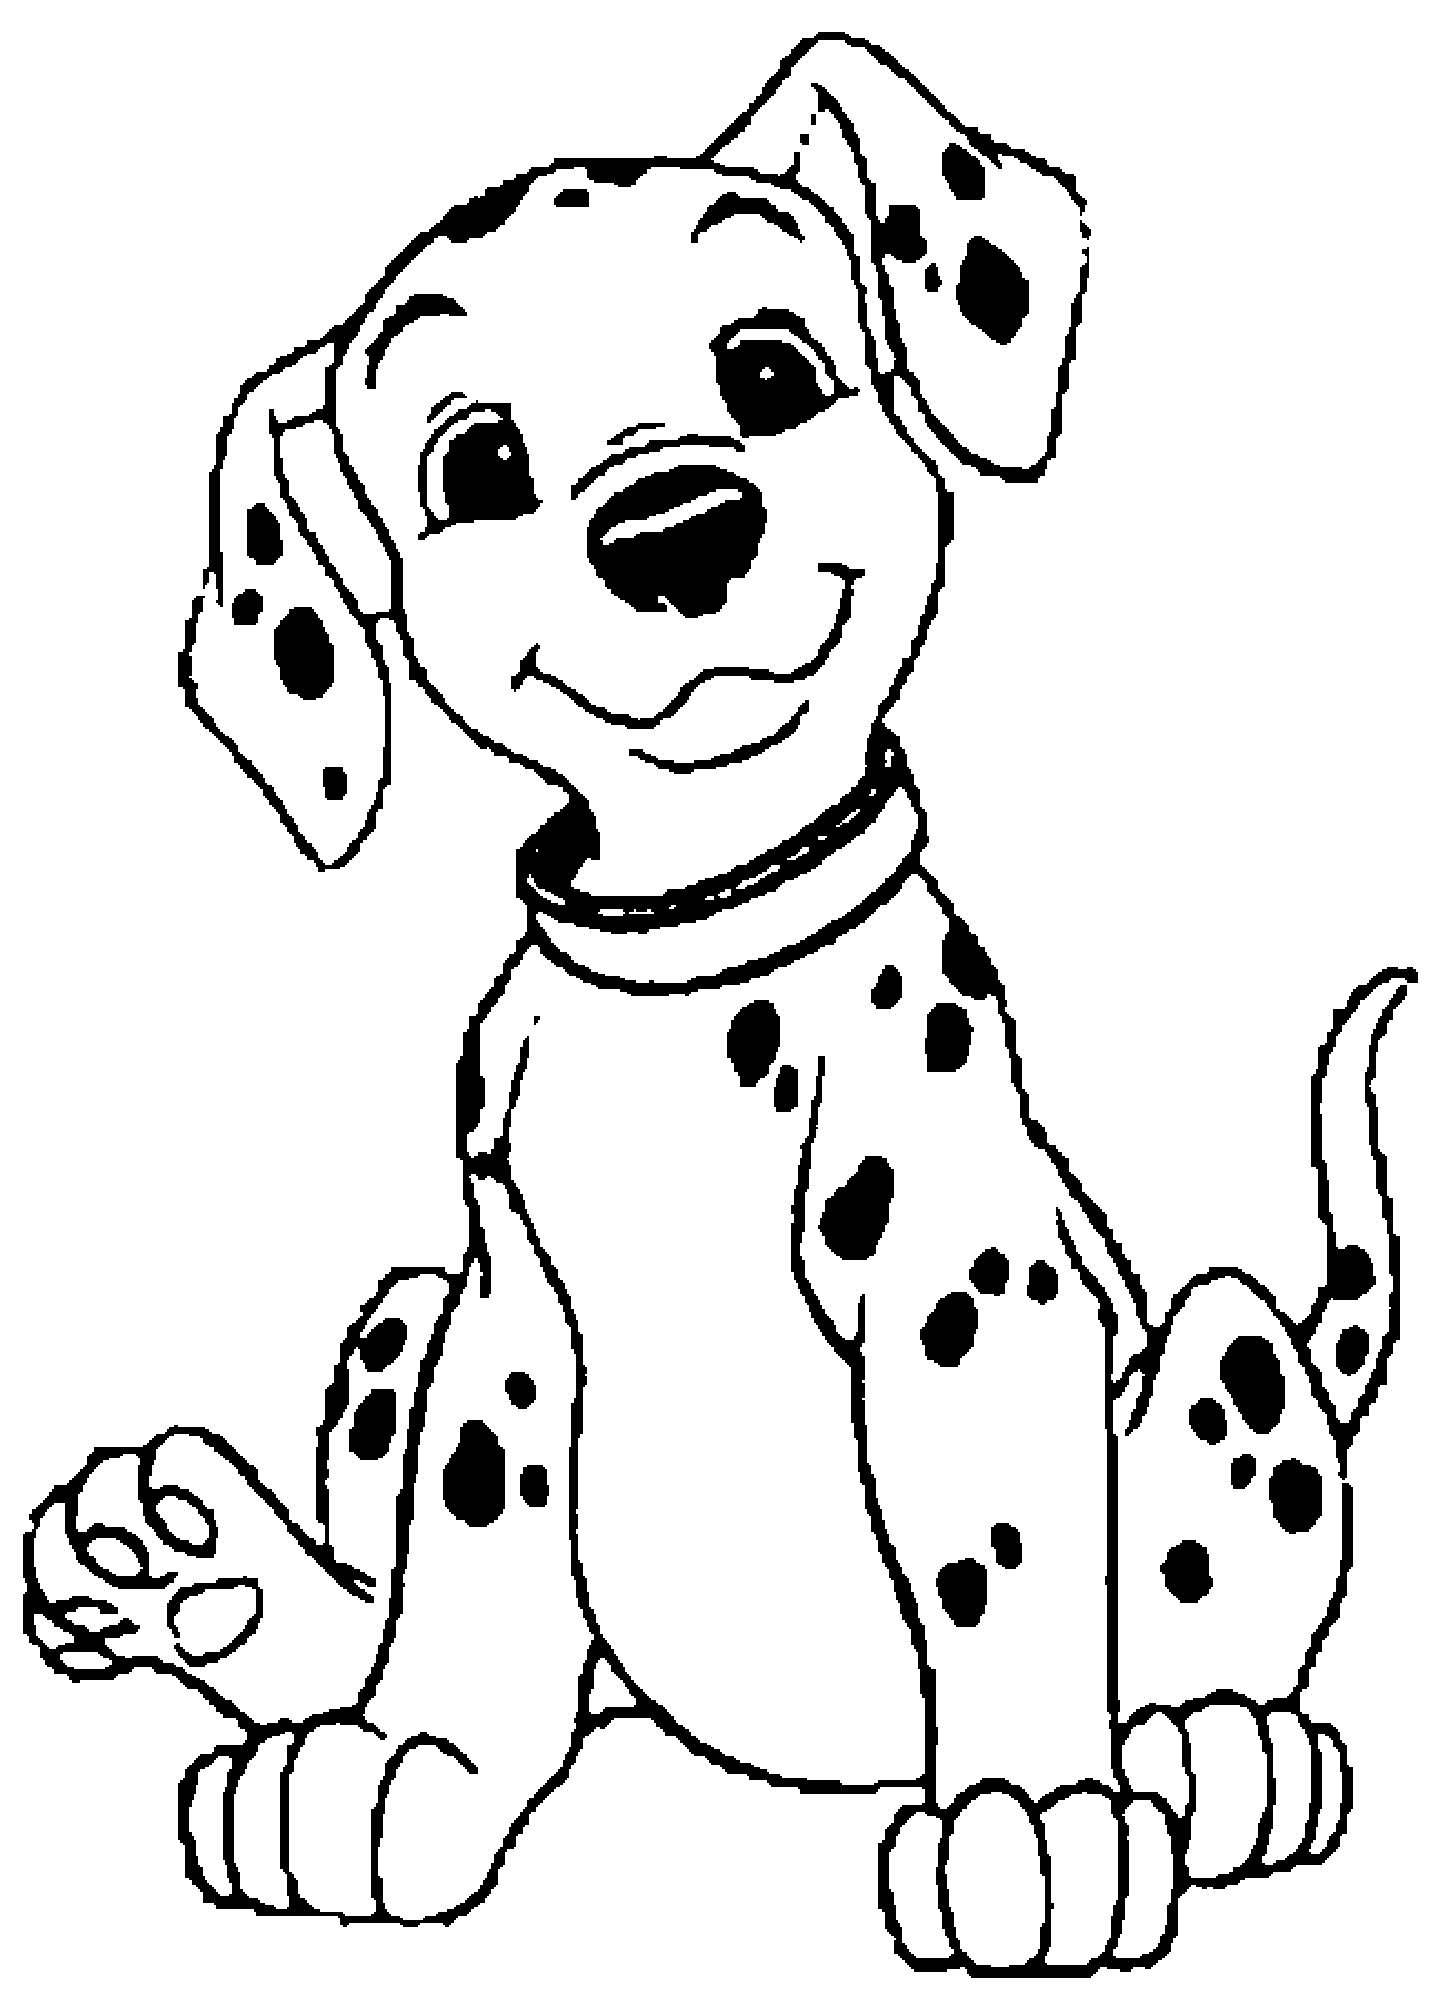 Dalmatians coloring pages to print for kids